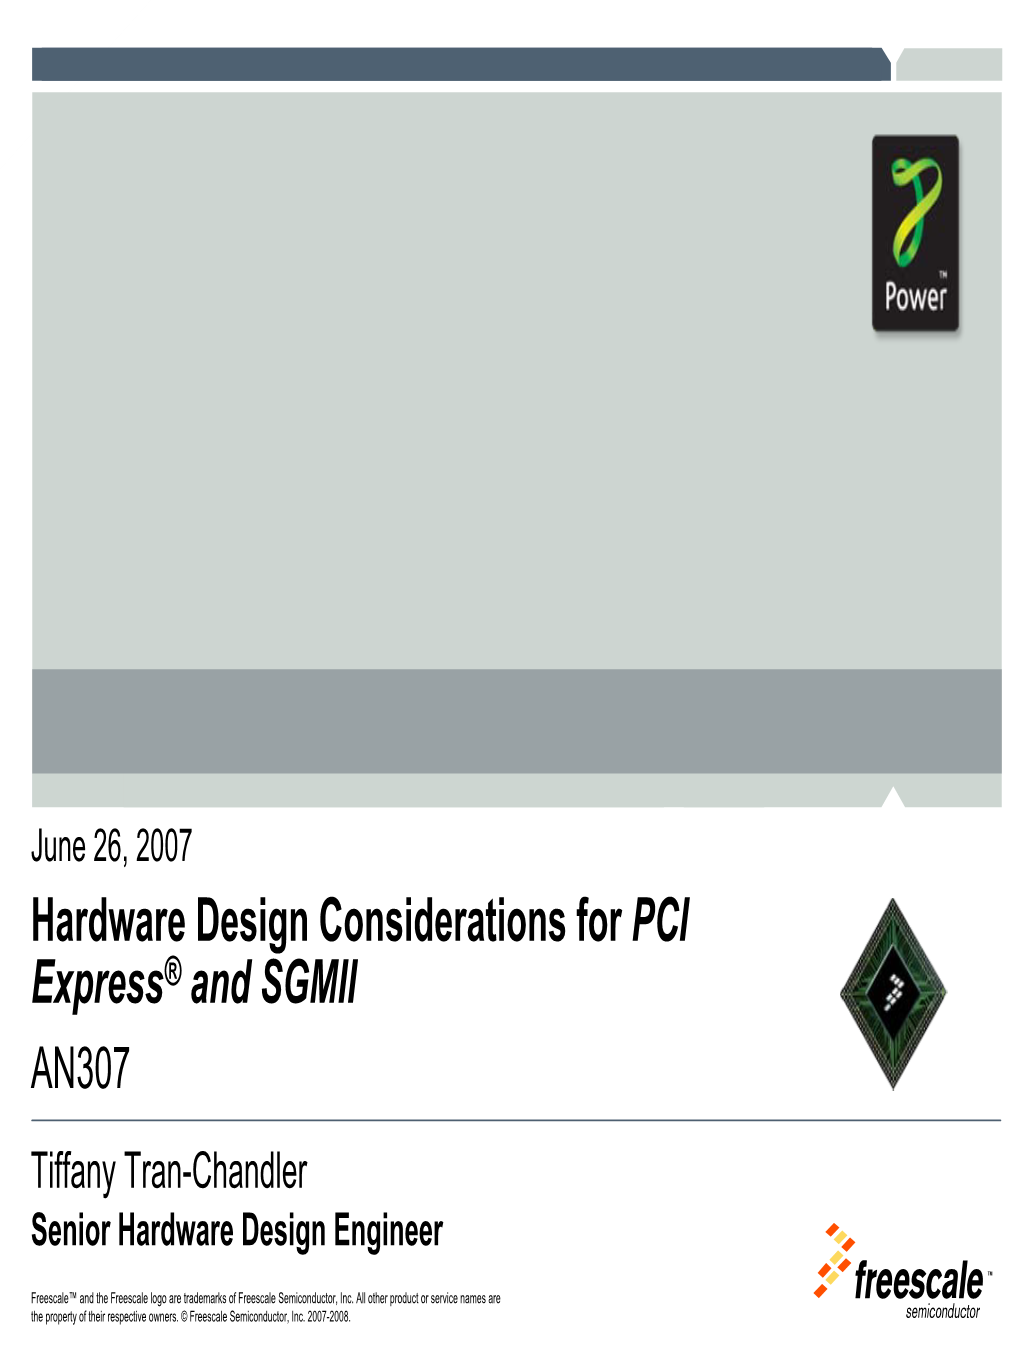 Hardware Design Considerations for PCI Expresstm and SGMII